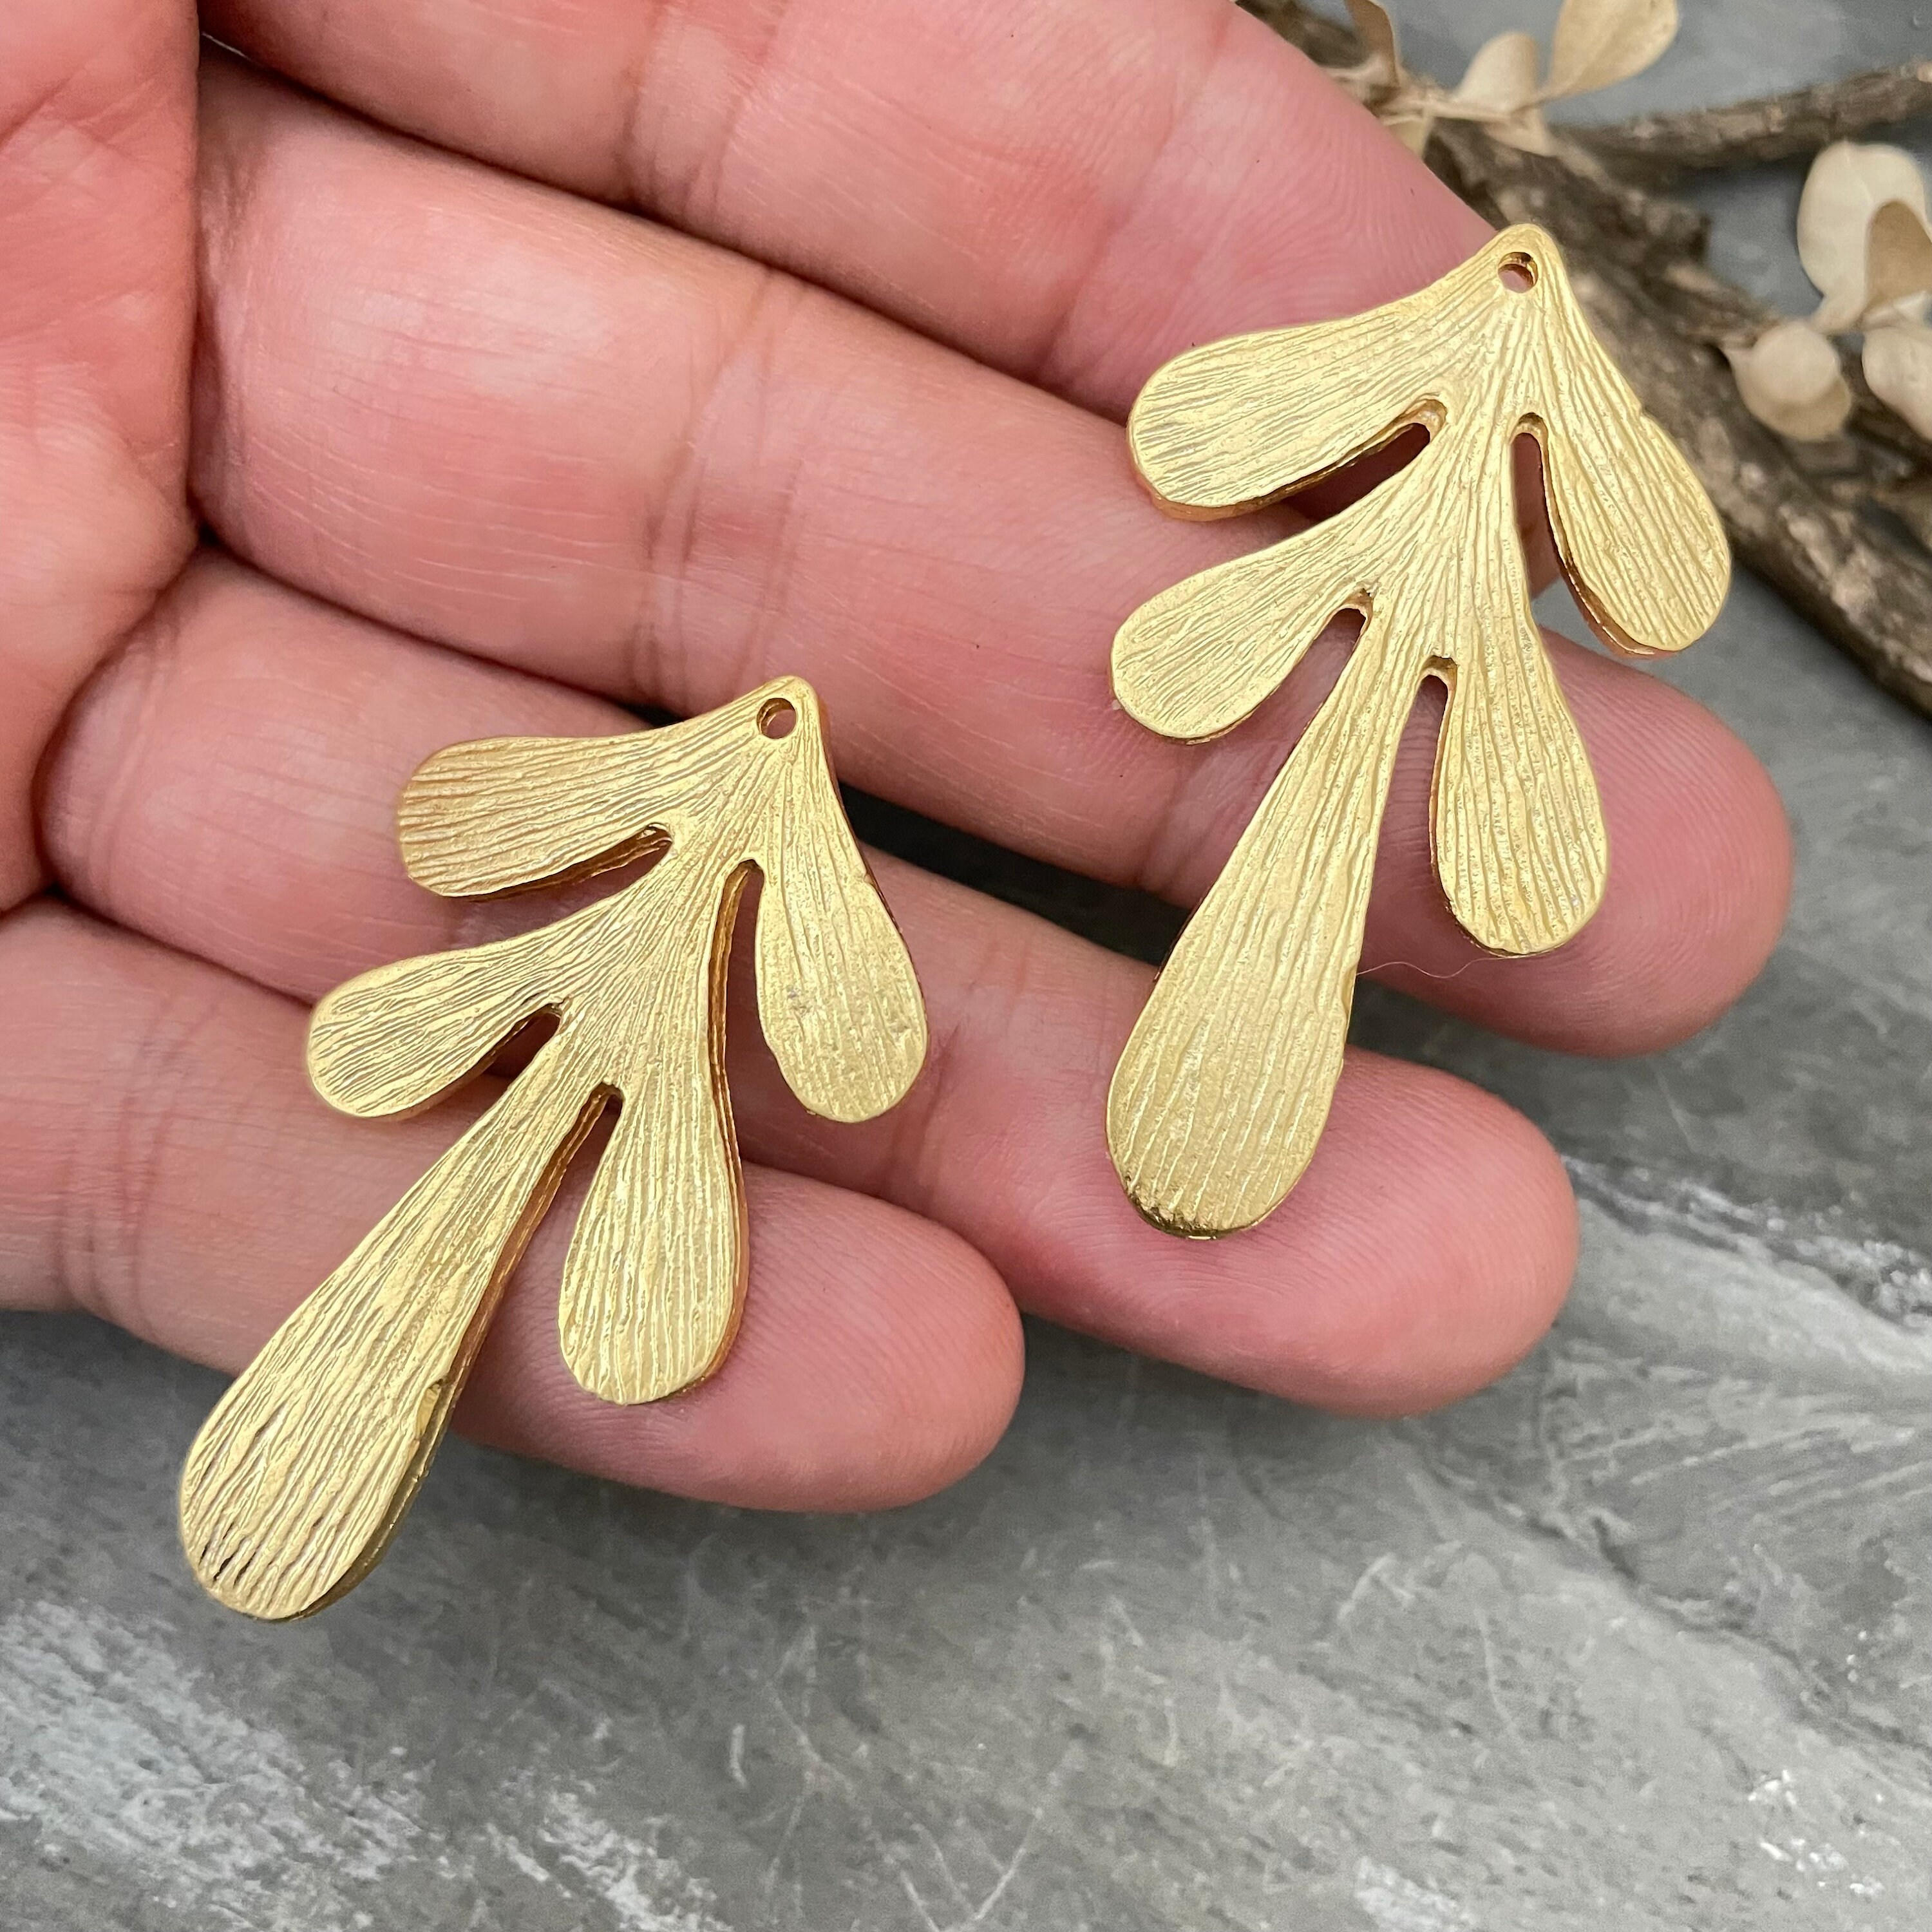 88 PCS - Raw Brass Earring Findings-One set, endless possibilities.  Wholesale earring findings for jewelry making parts. No Plated/Coated